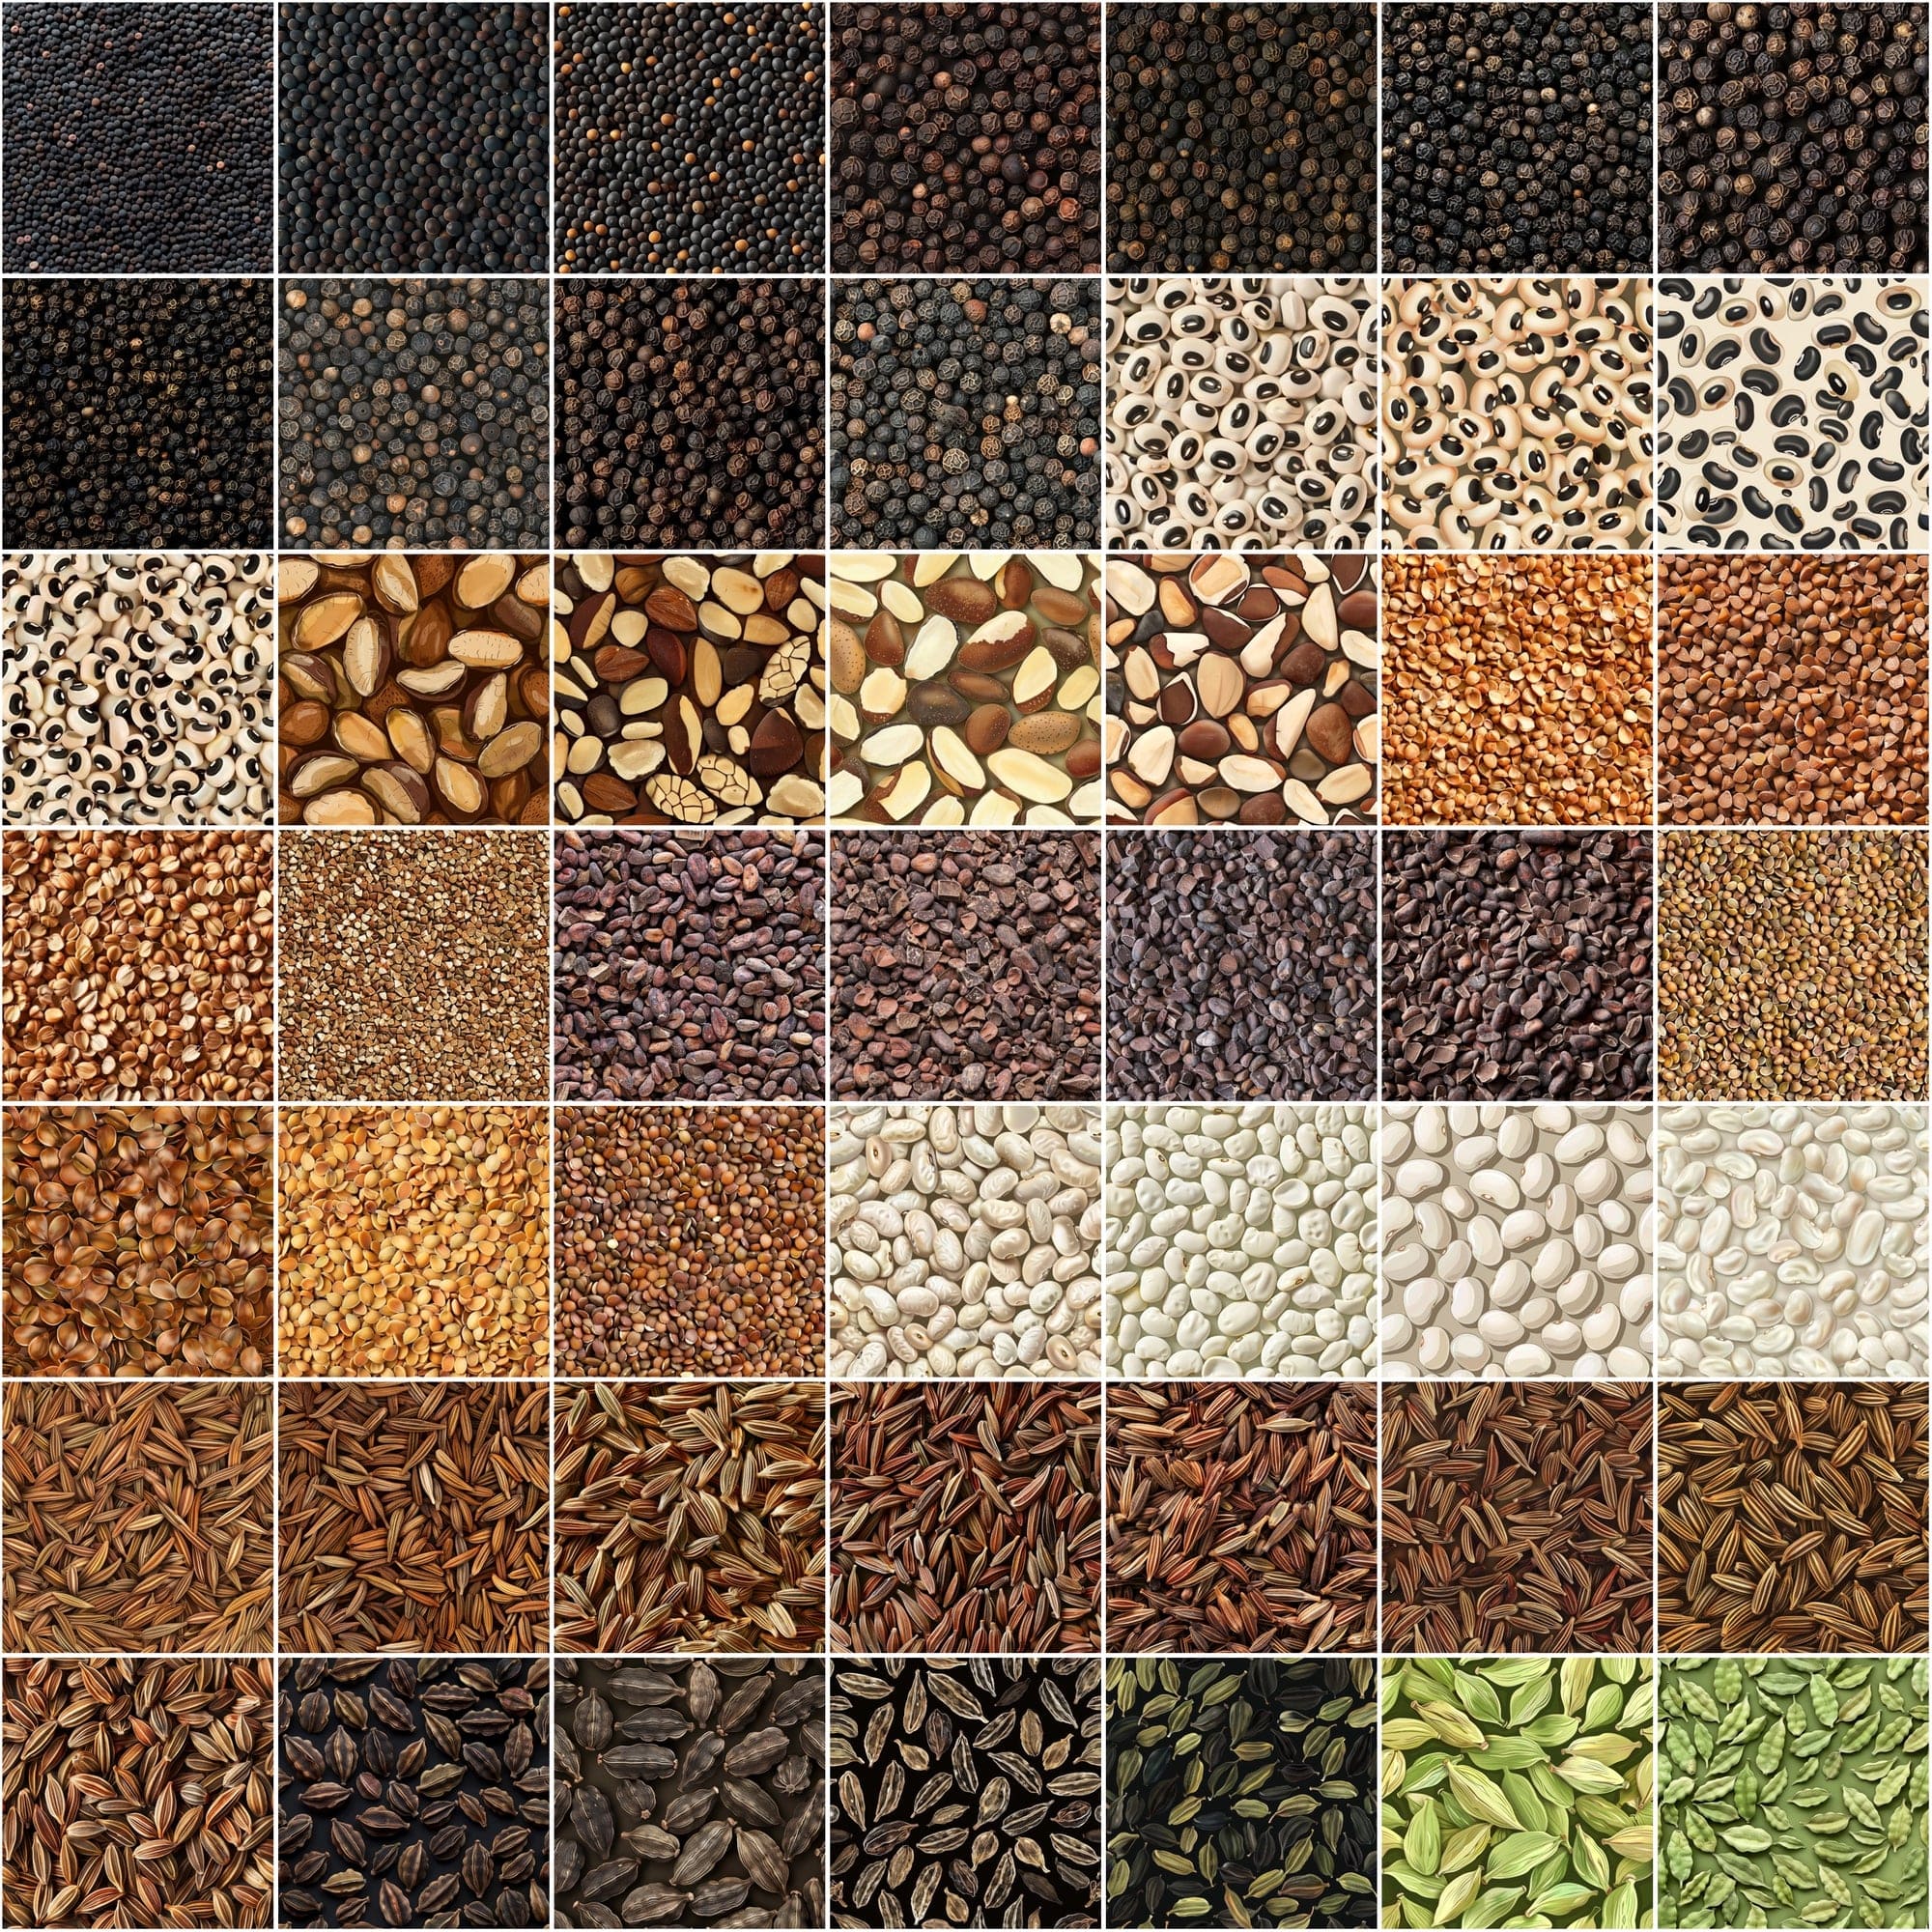 660 Seamless Spice & Seed Backgrounds with Photoshop Patterns Digital Download Sumobundle